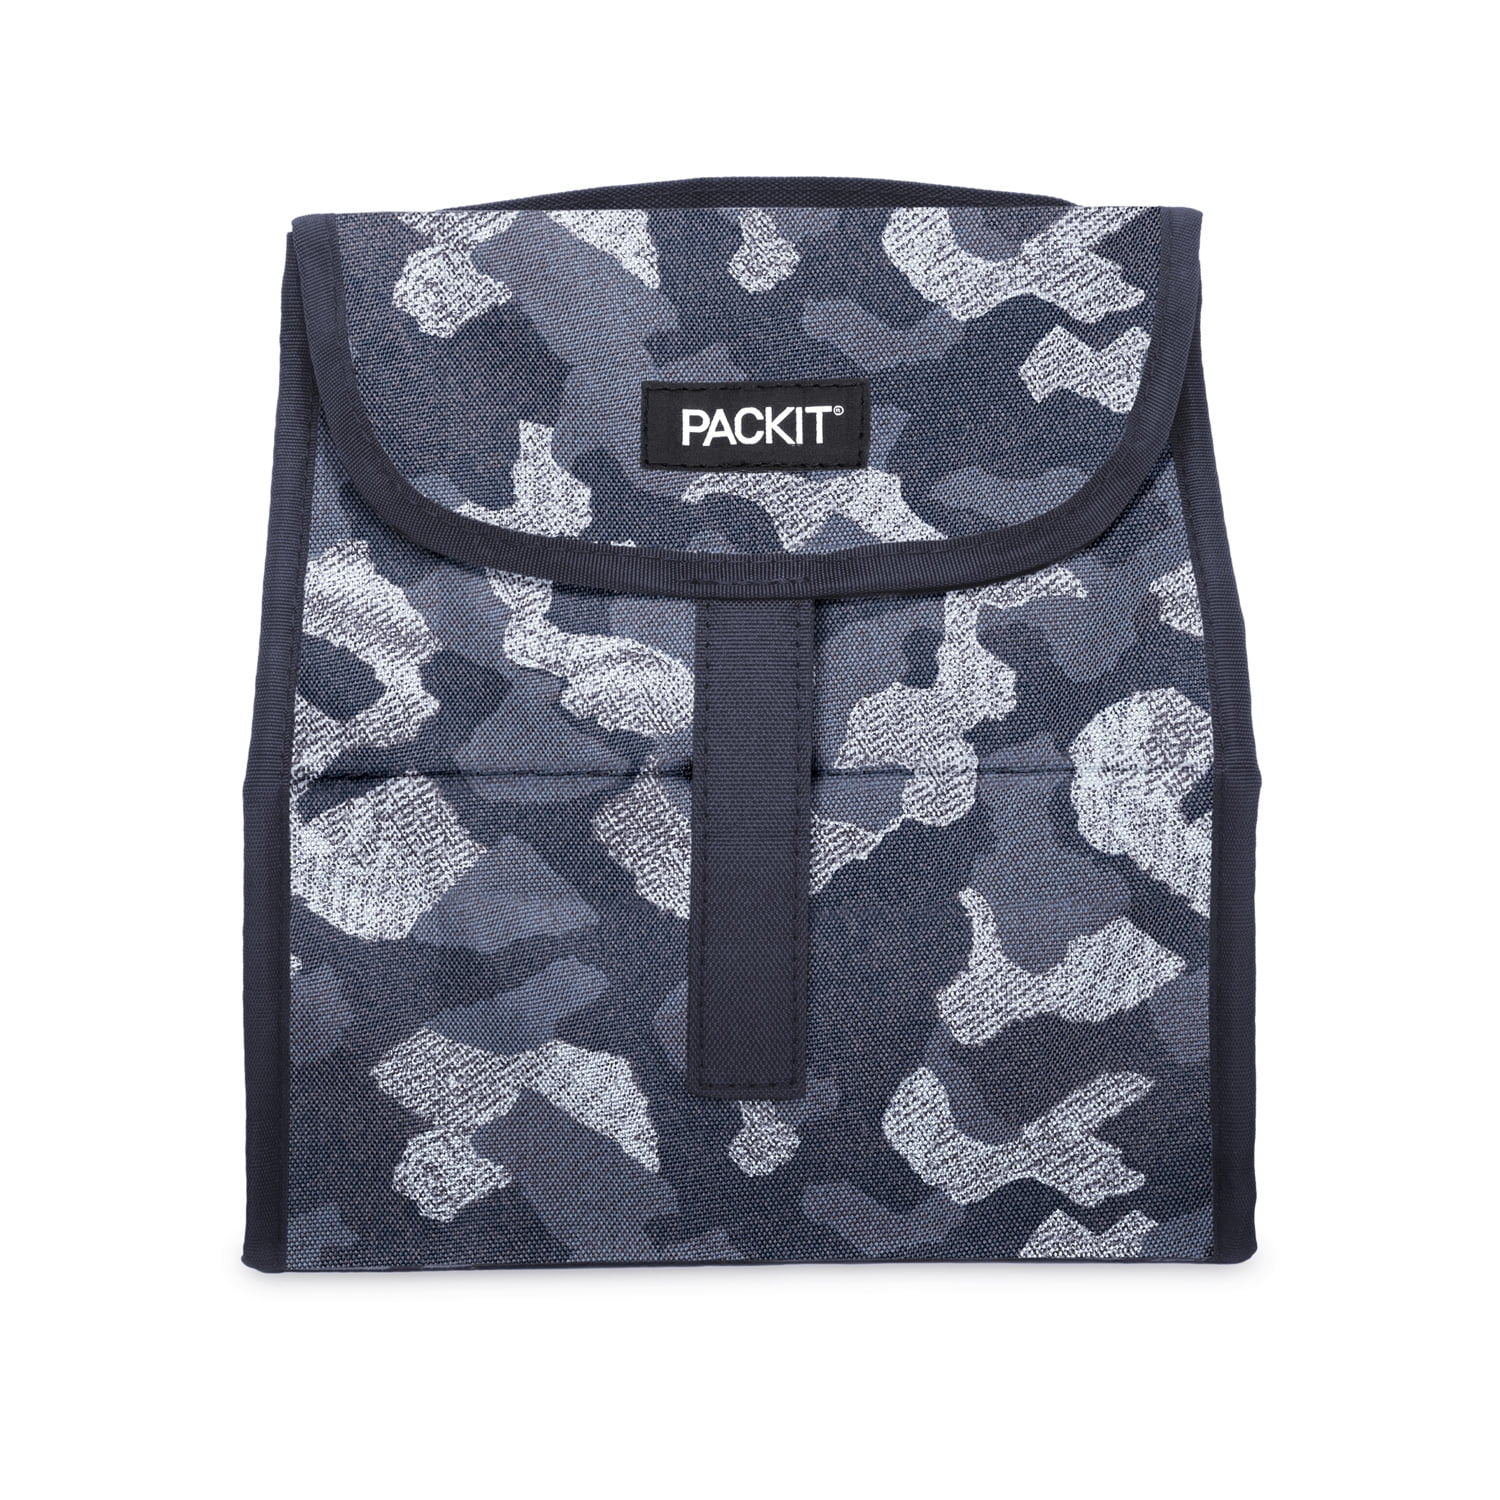 PackIt Brand, Textured Grey Camouflage, Freezable, and Reusable